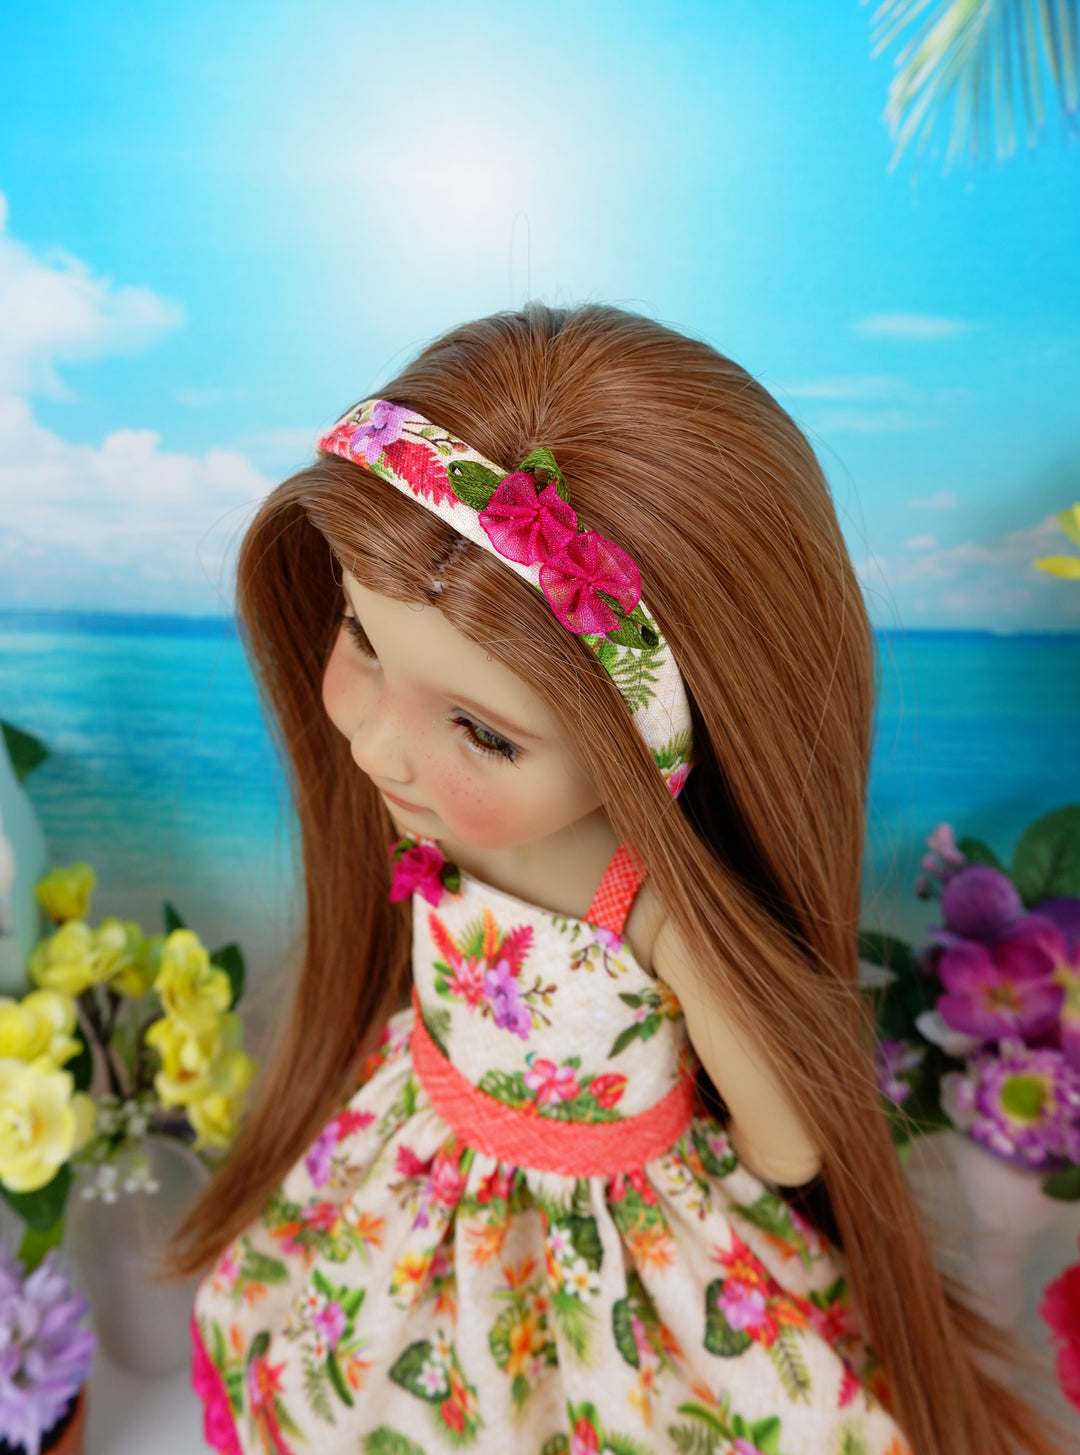 Tropic Bouquet - dress with shoes for Ruby Red Fashion Friends doll